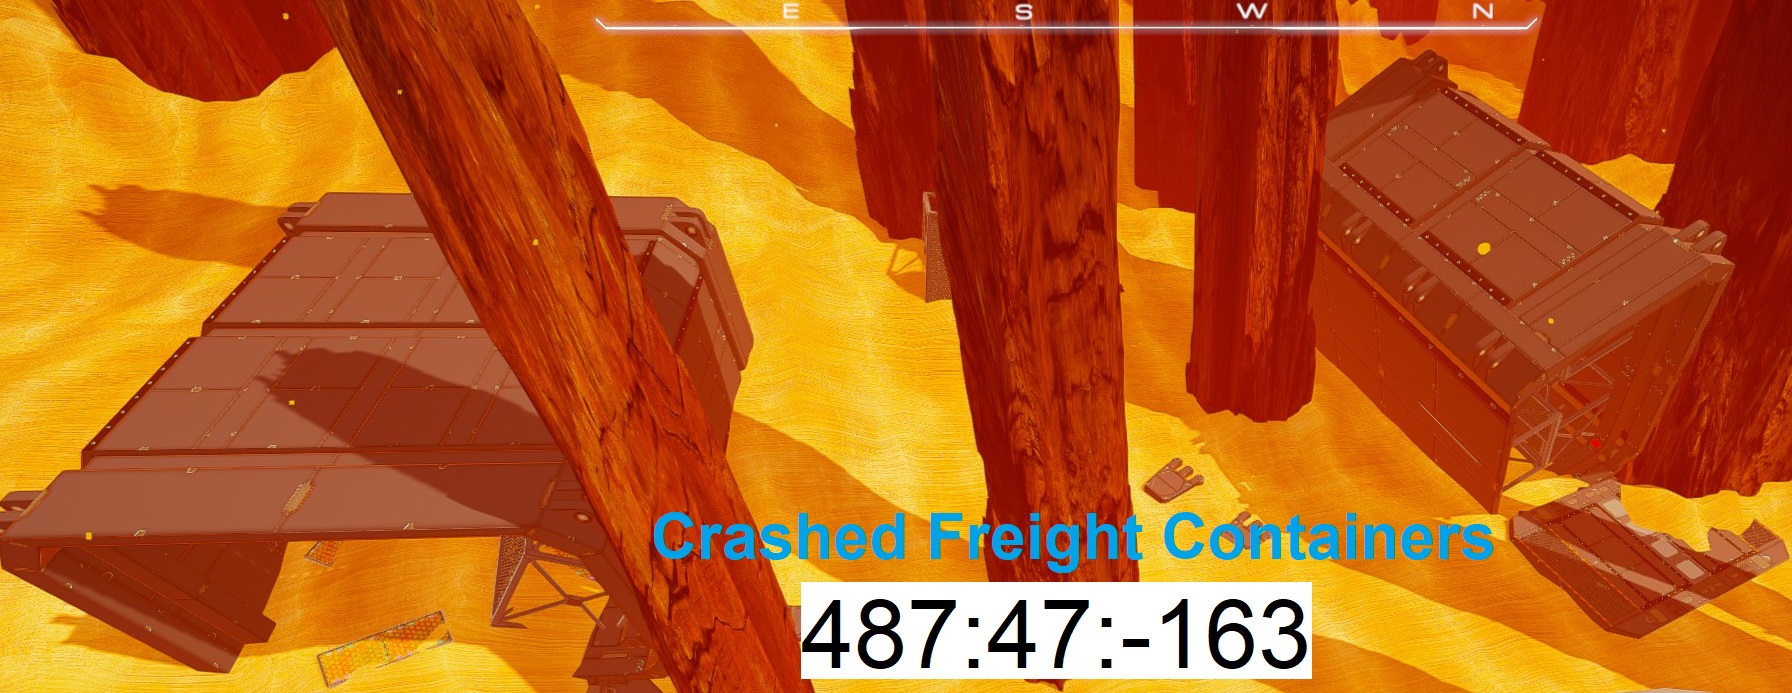 The Planet Crafter: Prologue Crashed Remnants List + Loot Guide - Crashed Freight Containers - 7AB5FA0